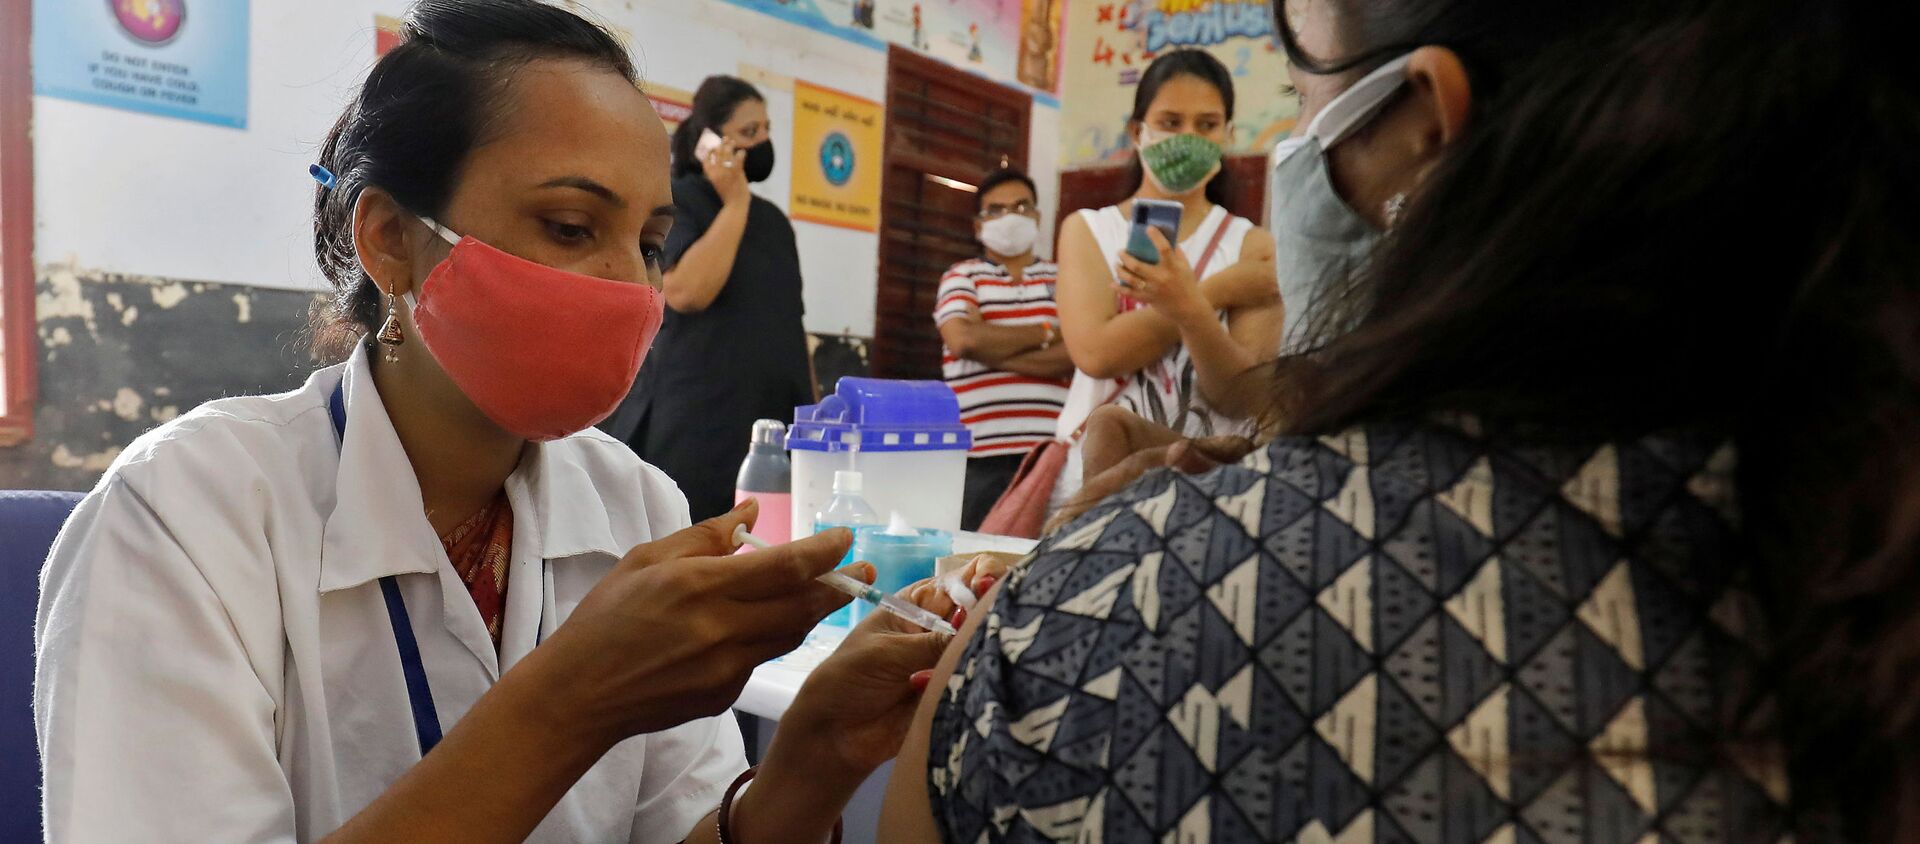 A healthcare worker gives a dose of COVISHIELD, a coronavirus disease (COVID-19) vaccine manufactured by Serum Institute of India, to a woman inside a classroom of a school, which has been converted into a temporary vaccination centre, in Ahmedabad, India, May 1, 2021 - Sputnik International, 1920, 27.05.2021